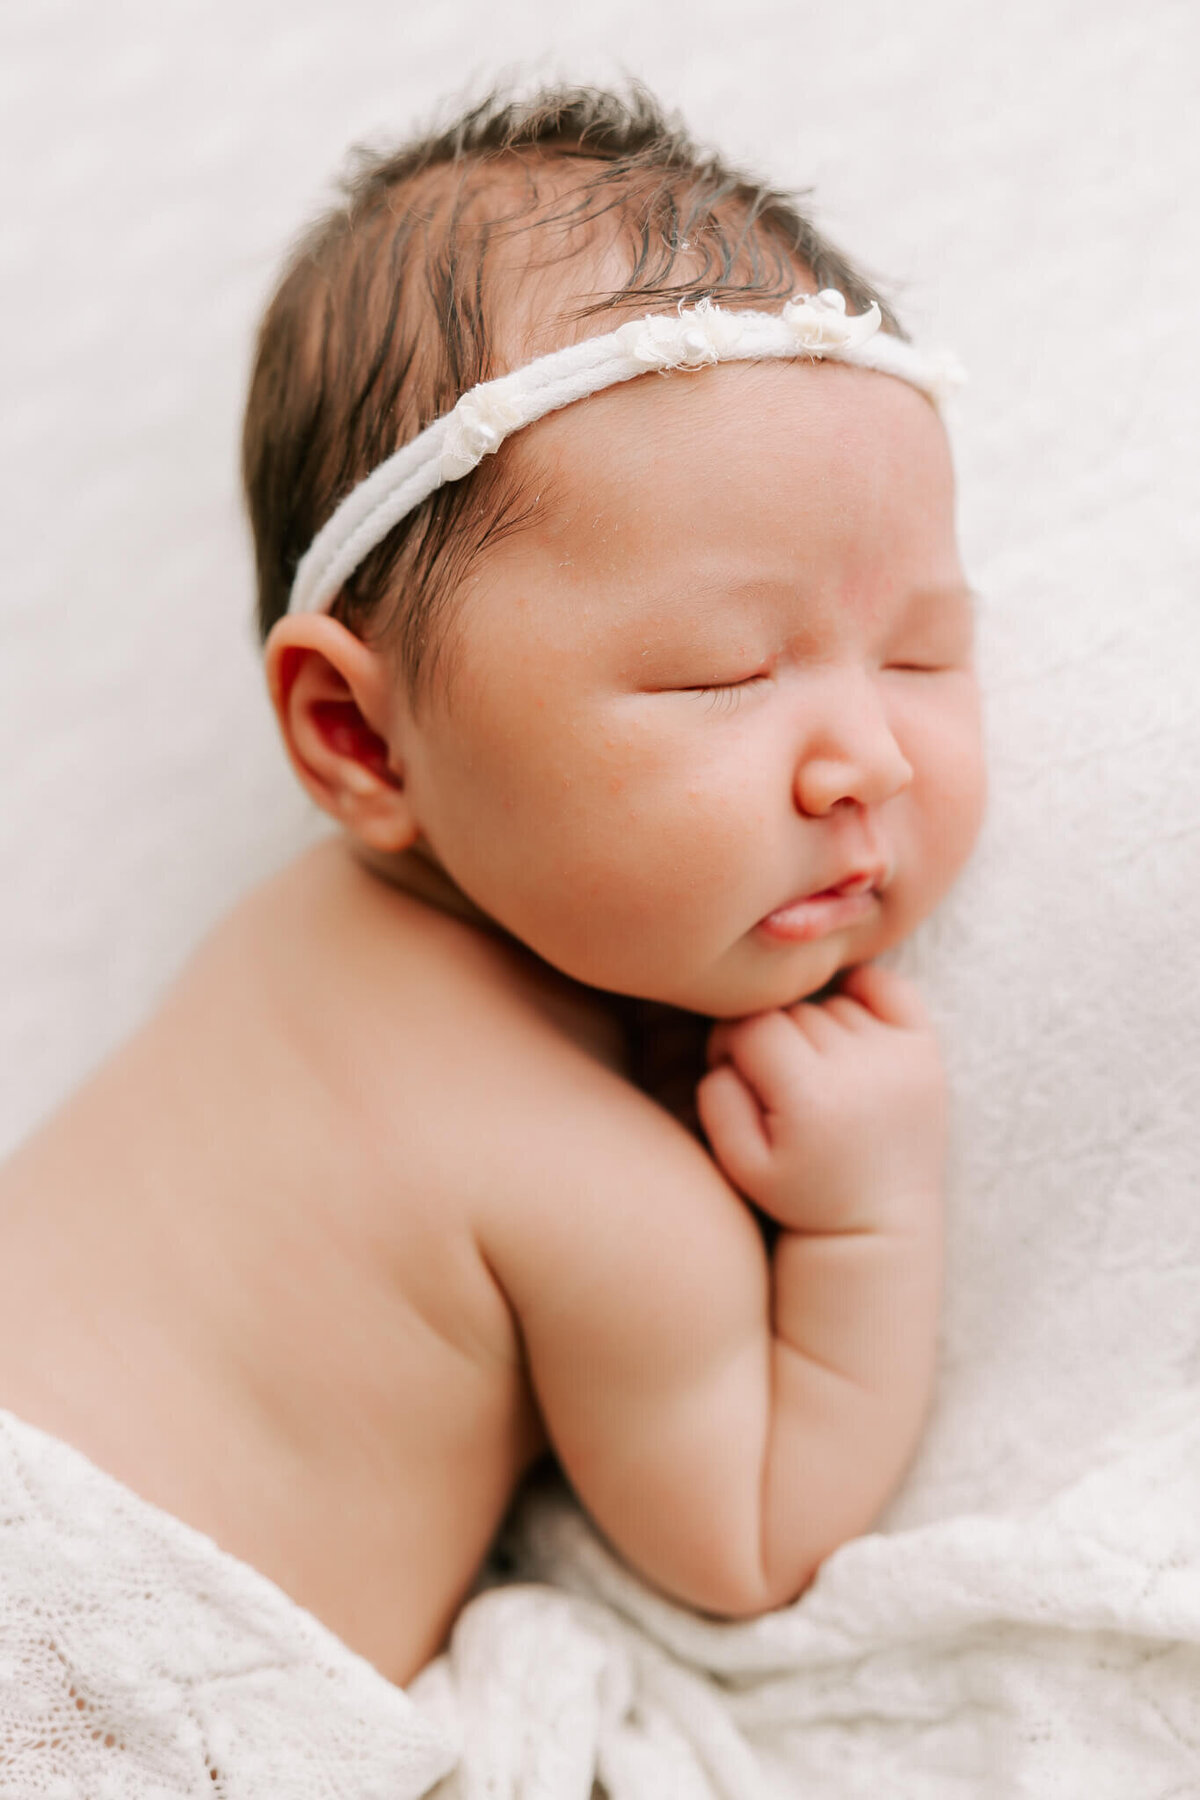 beautiful portrait of infant on her tummy sleeping with her hand under chin